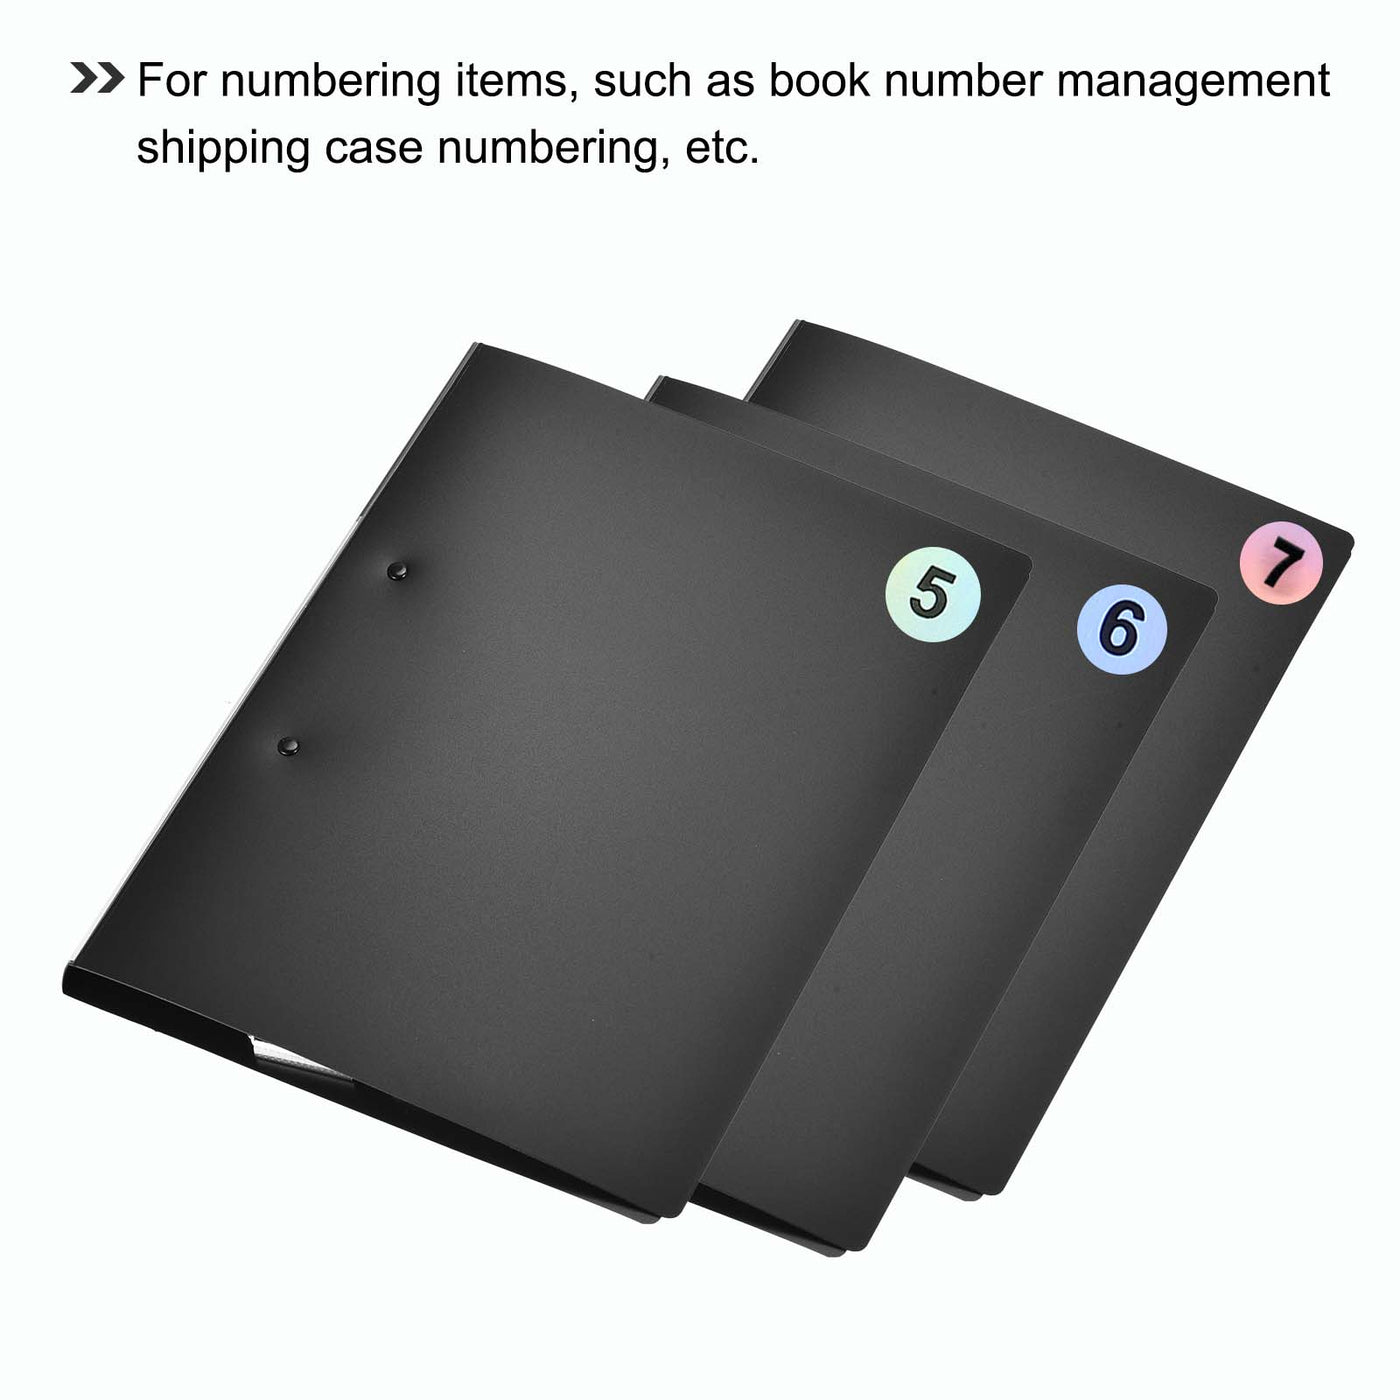 Harfington Laser Number Stickers, Number 6 Round Self Adhesive Reflective Sticker for Inventory, Storage Organizing, 10 Sheets(1000pcs)